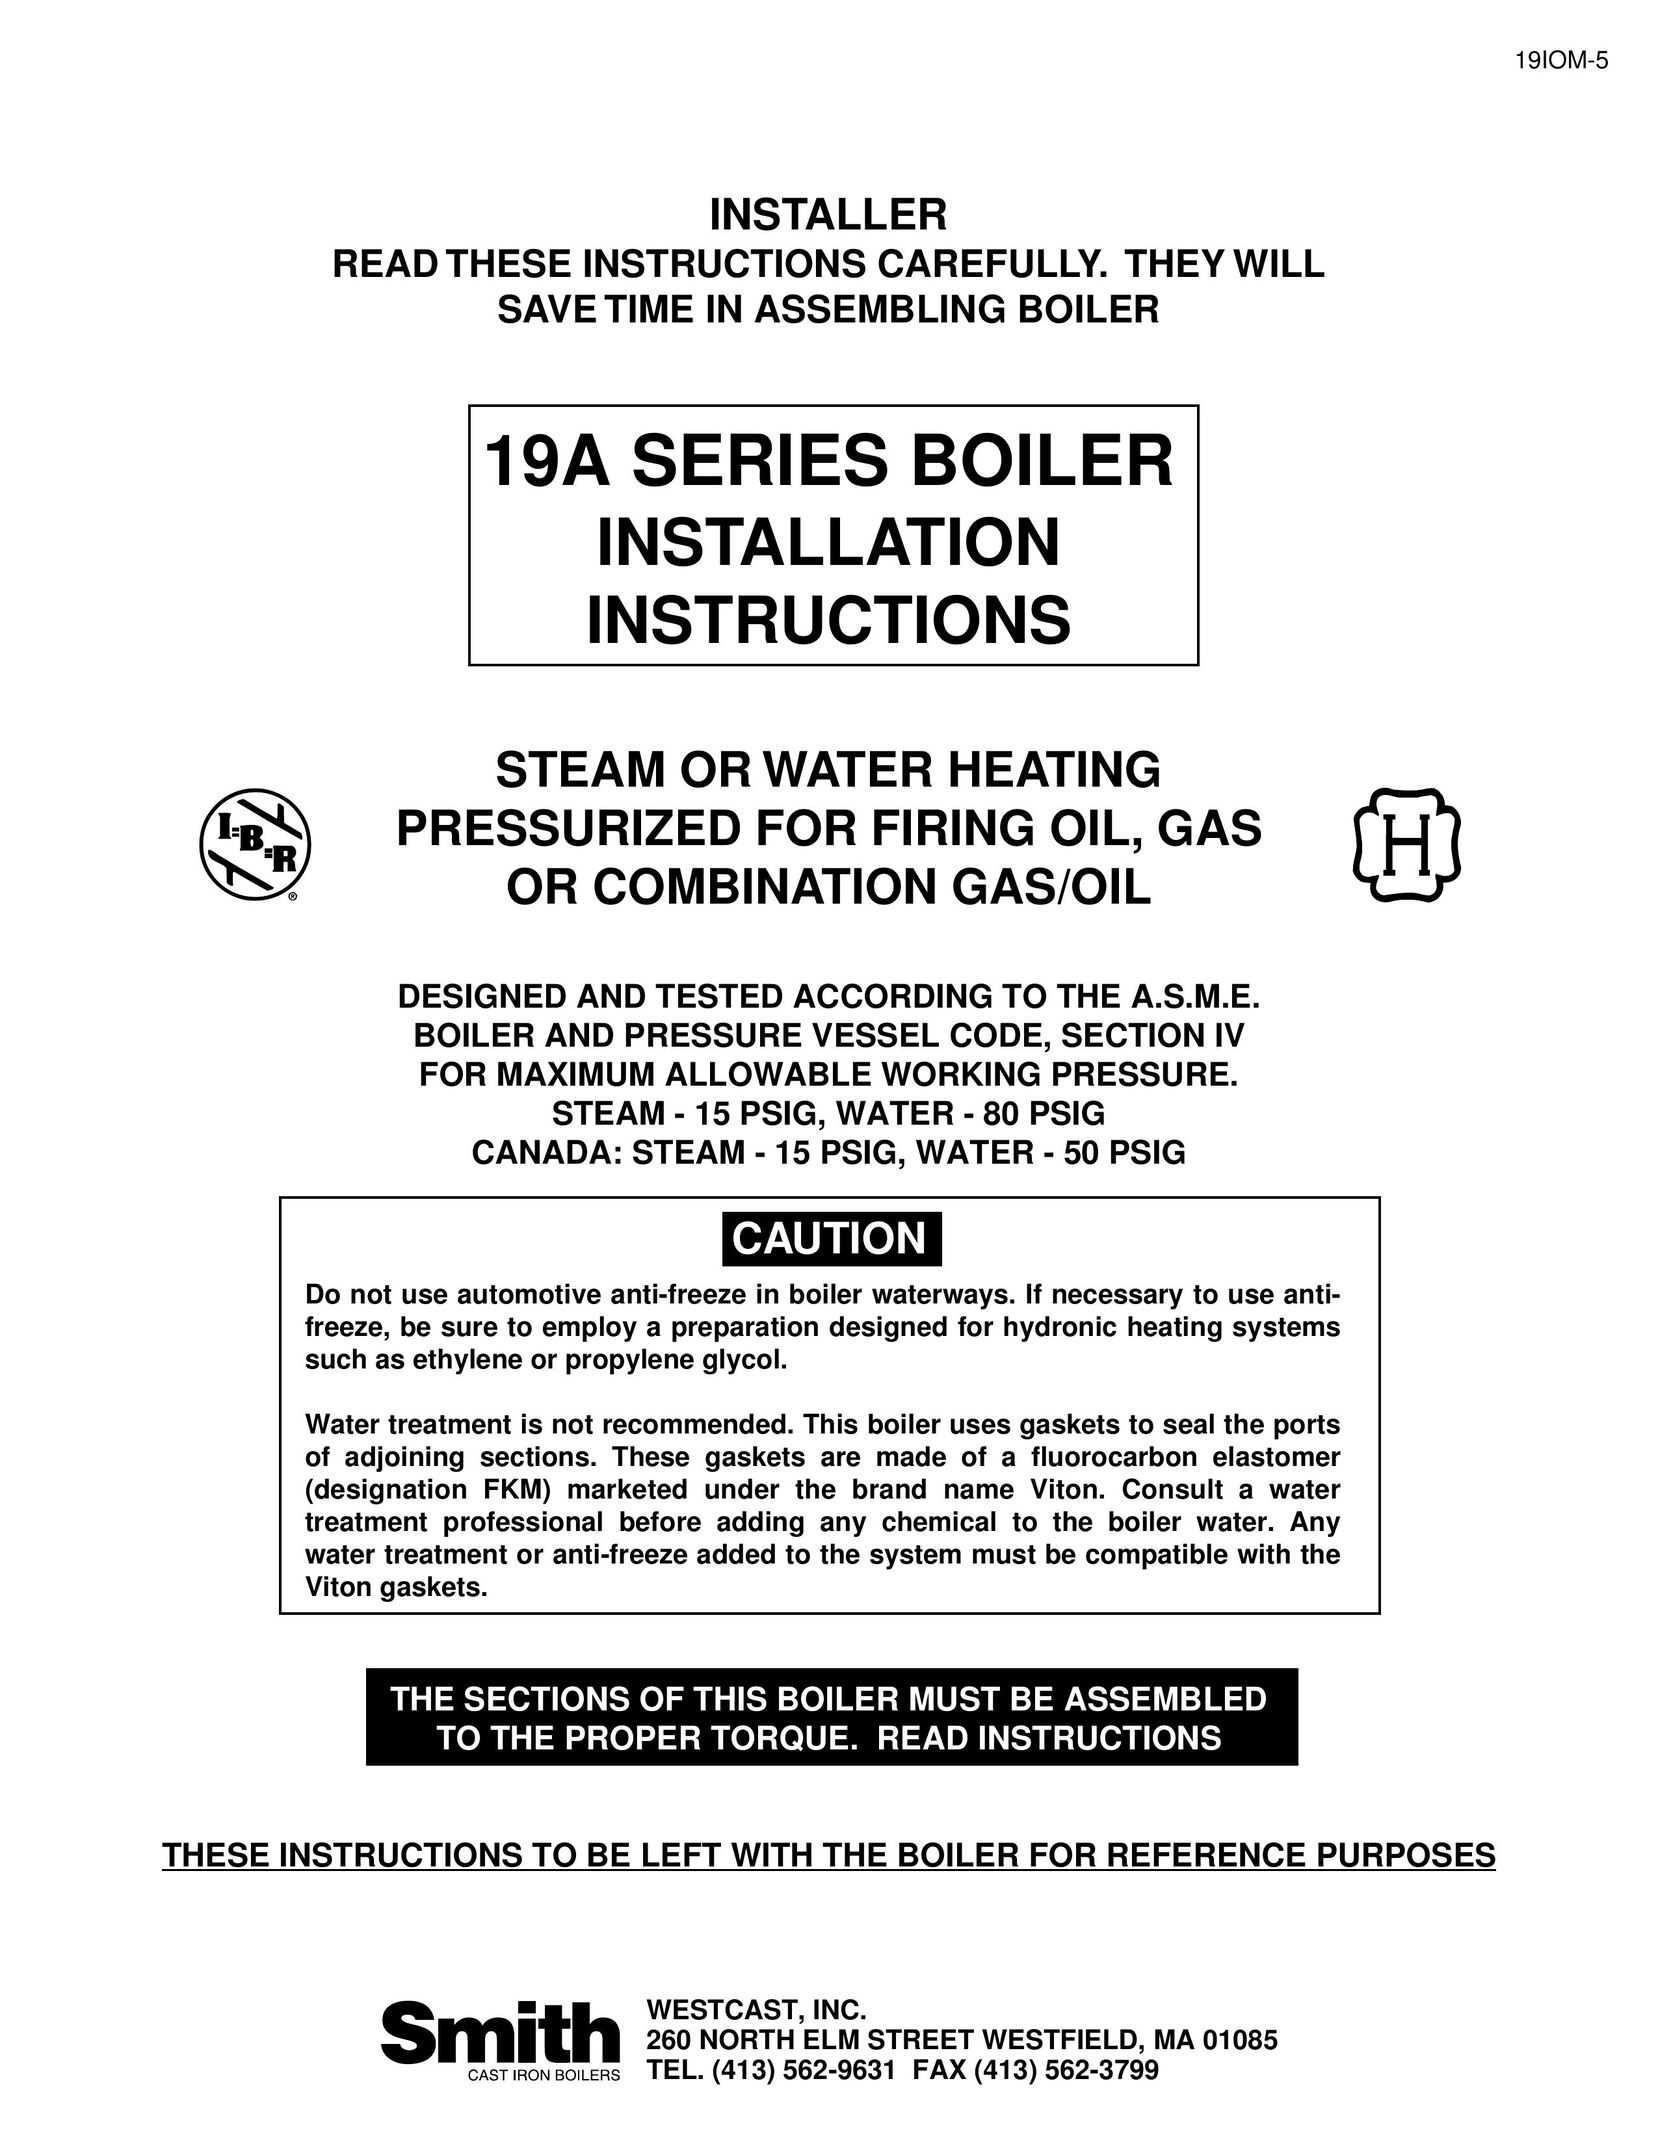 Smith Cast Iron Boilers 19A SERIES Boiler User Manual